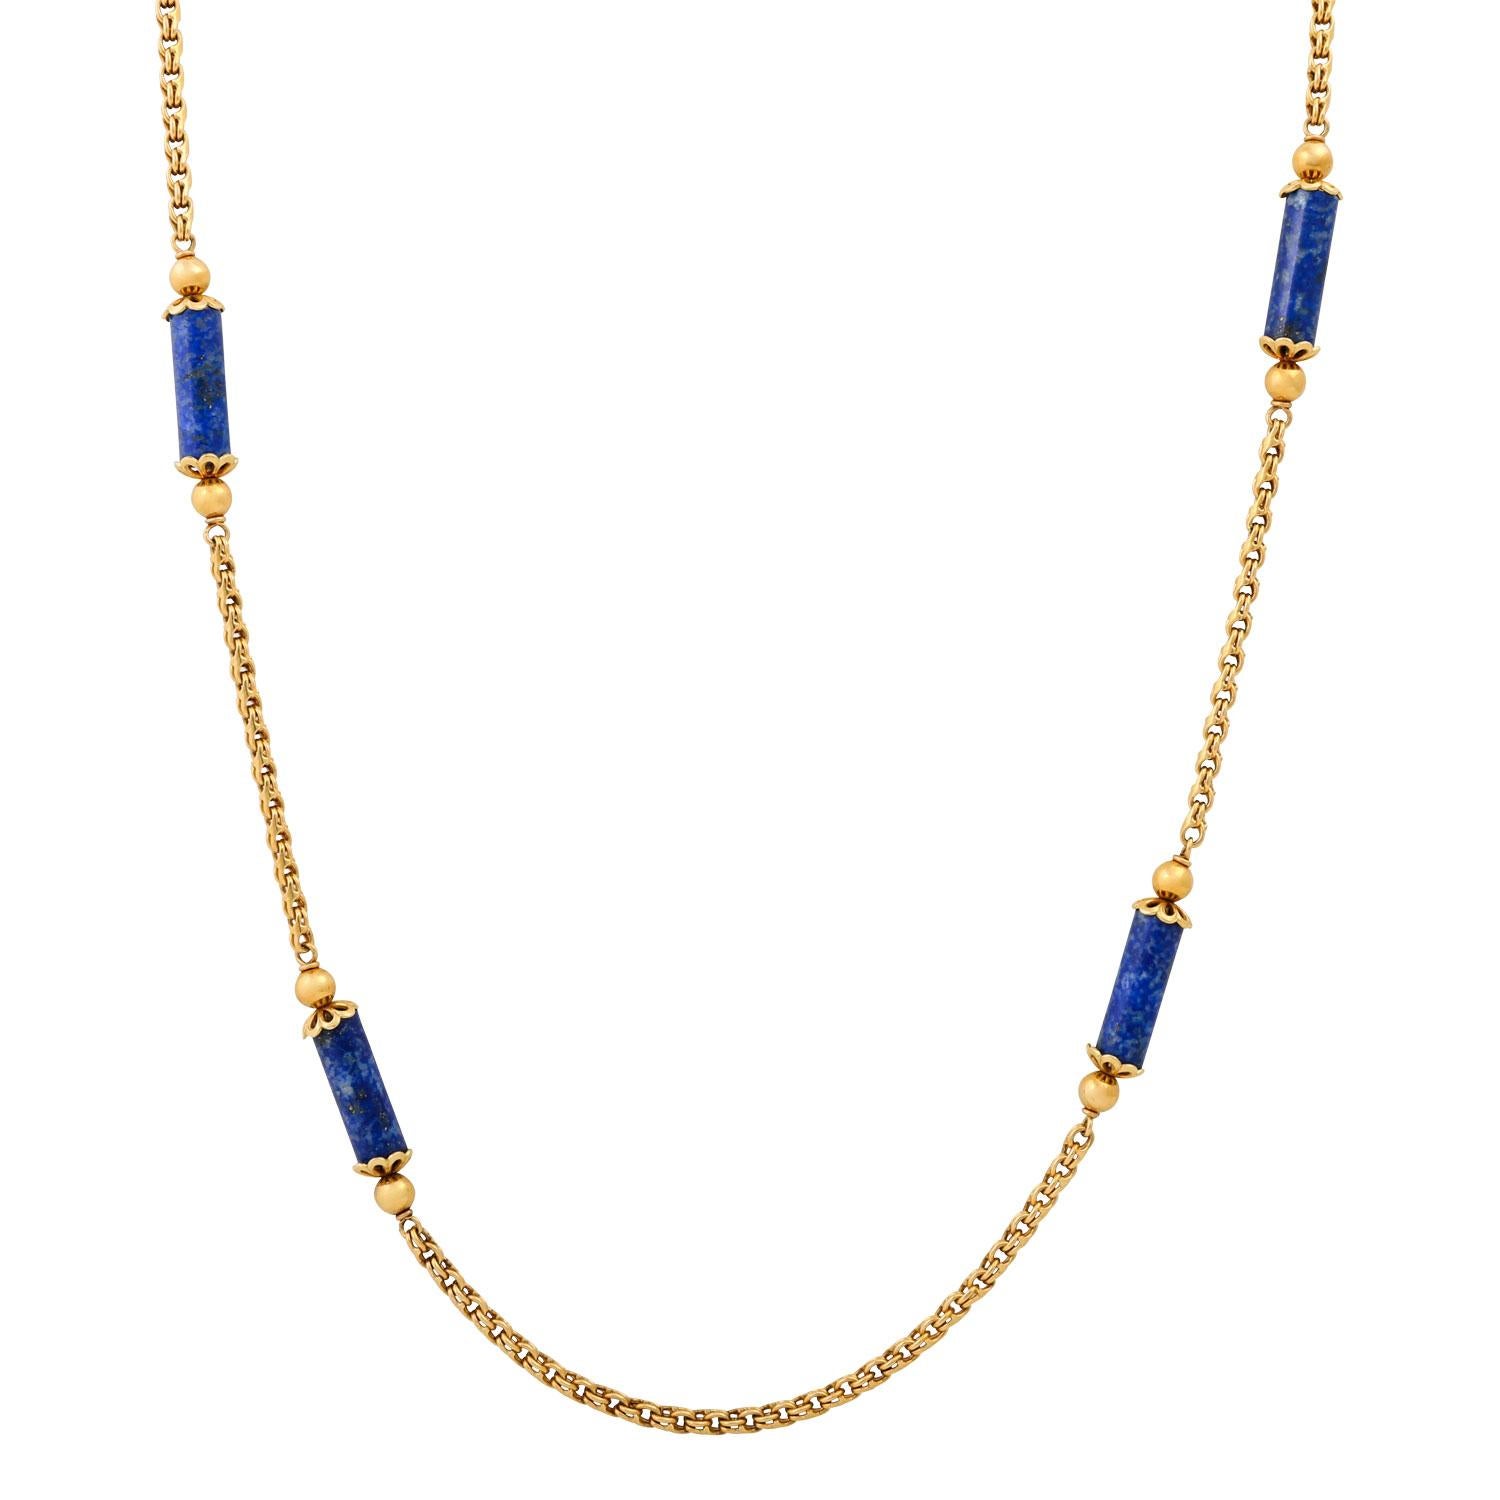 Long necklace with 5 lapis lazuli elements, GG 18K, length 90 cm, 1970s (price today 5400.-).